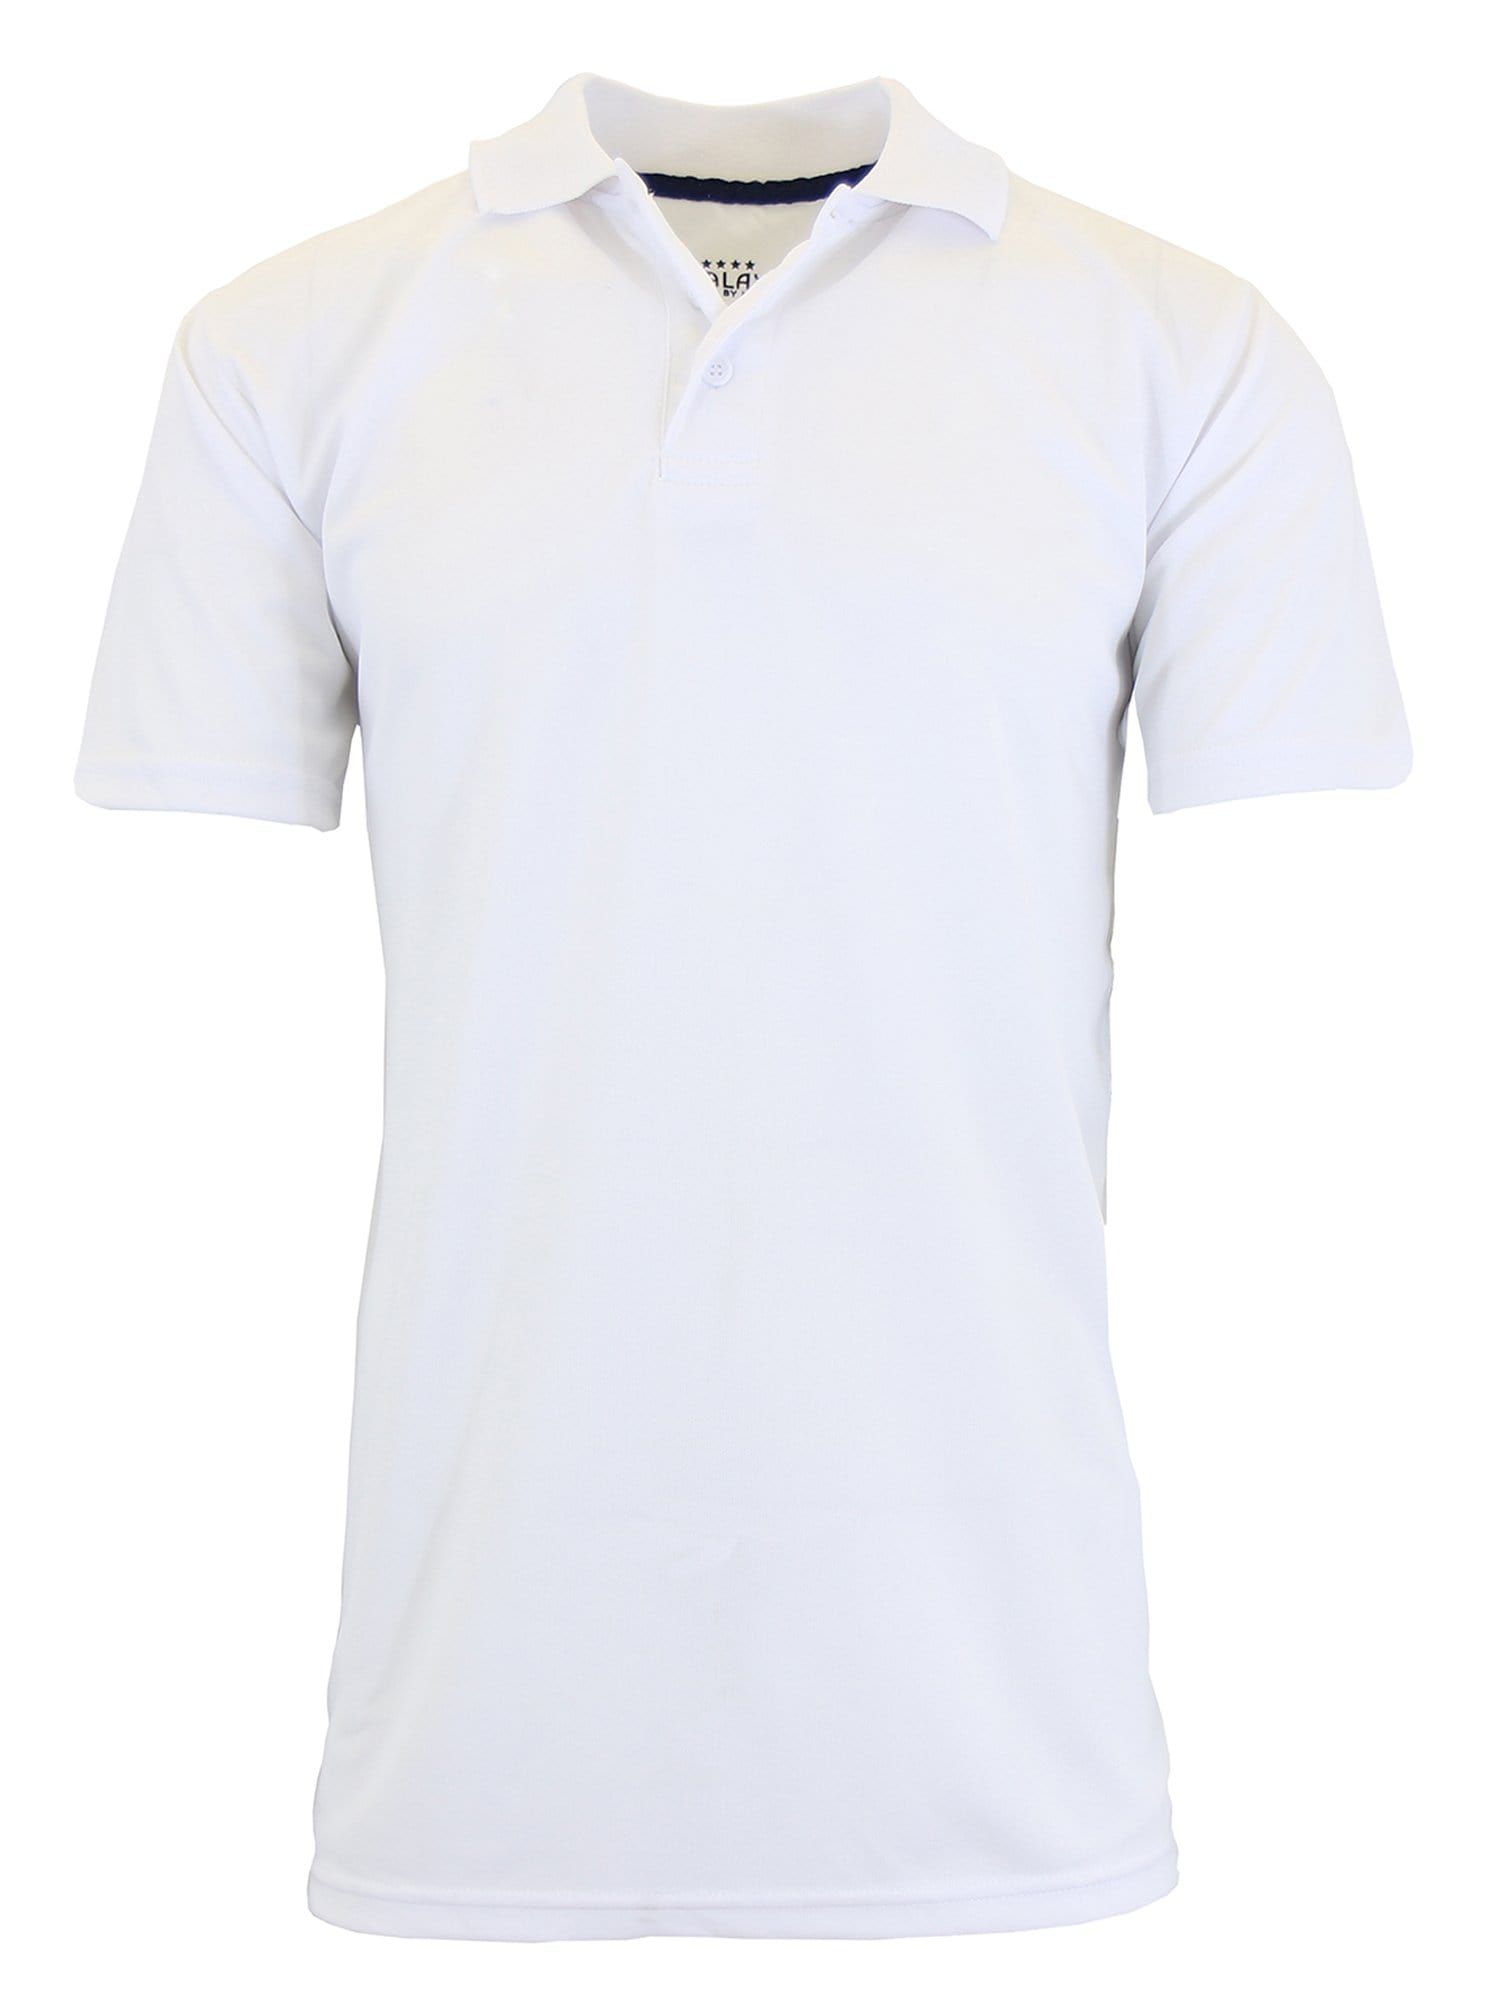 Men's Dry Fit Moisture-Wicking Polo Shirt - GalaxybyHarvic